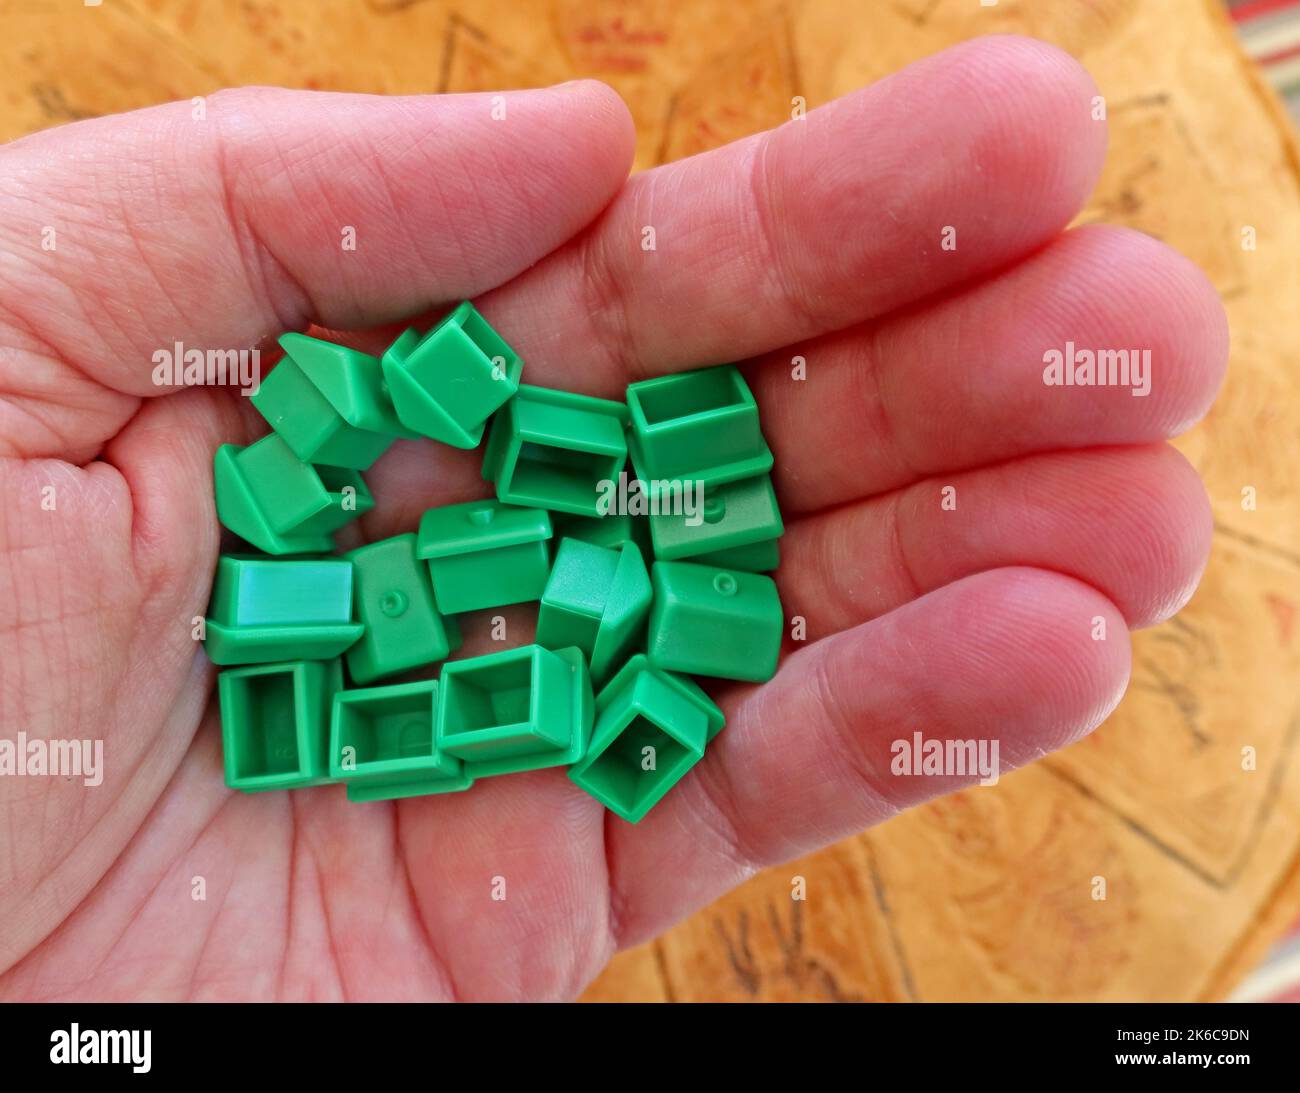 An adult hand, holding green Monopoly houses for rent or by, representing property and UK Housing issues Stock Photo